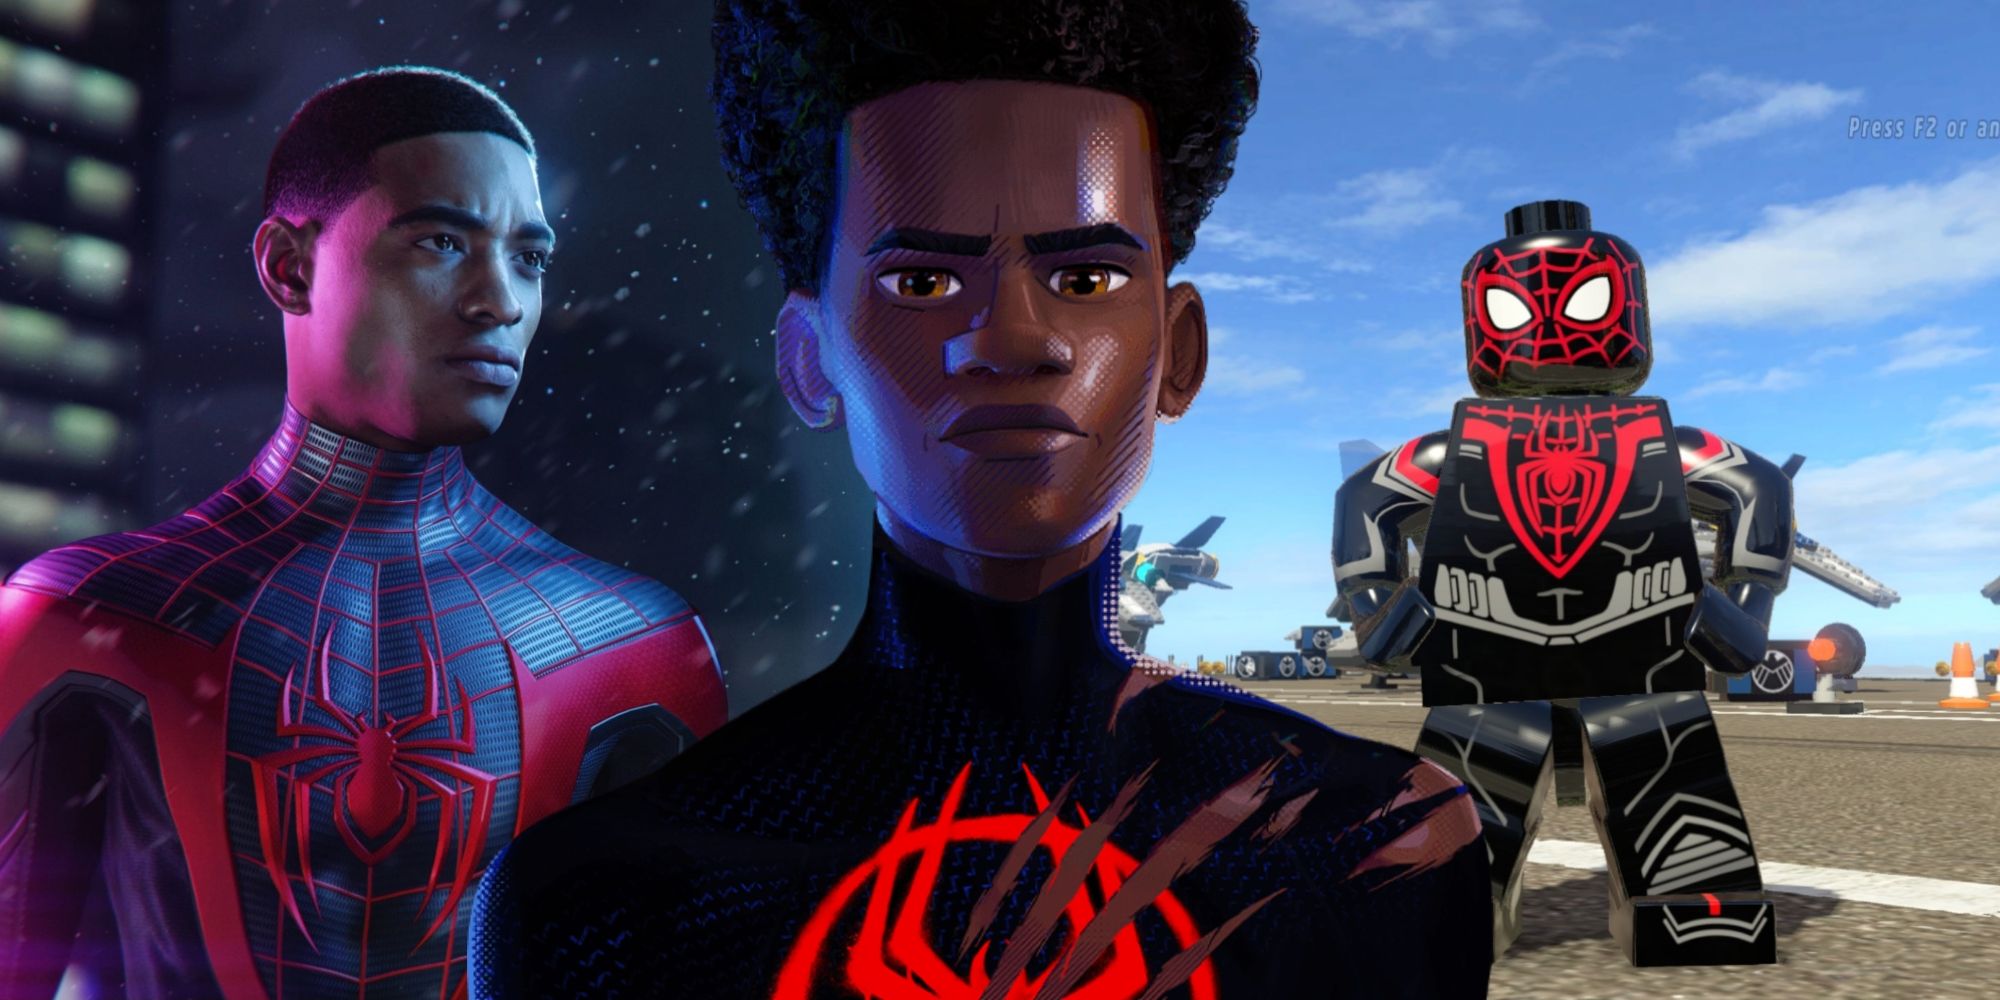 A collage of Miles Morales from the PlayStation games, the Spider-Verse movie, and the LEGO Marvel games